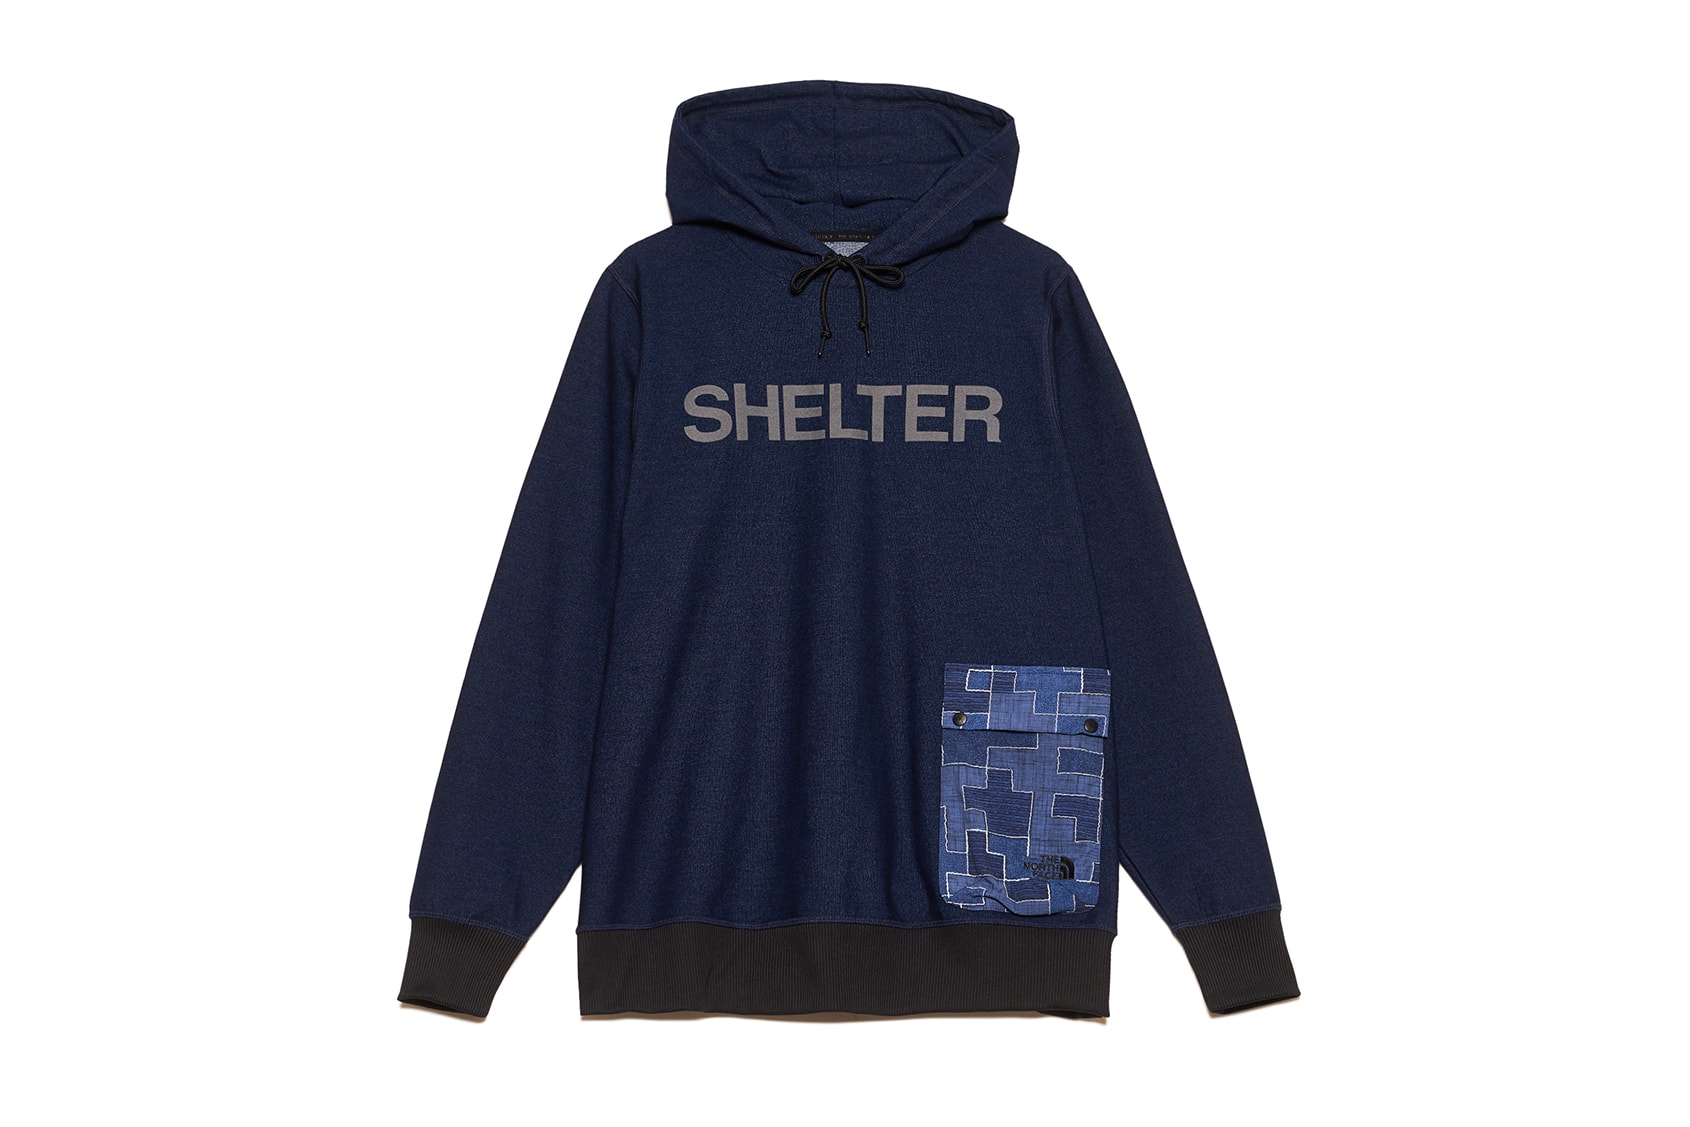 The North Face Black Series Shelter Products Très Bien North Face Jacket Outerwear Hoodies T-Shirts